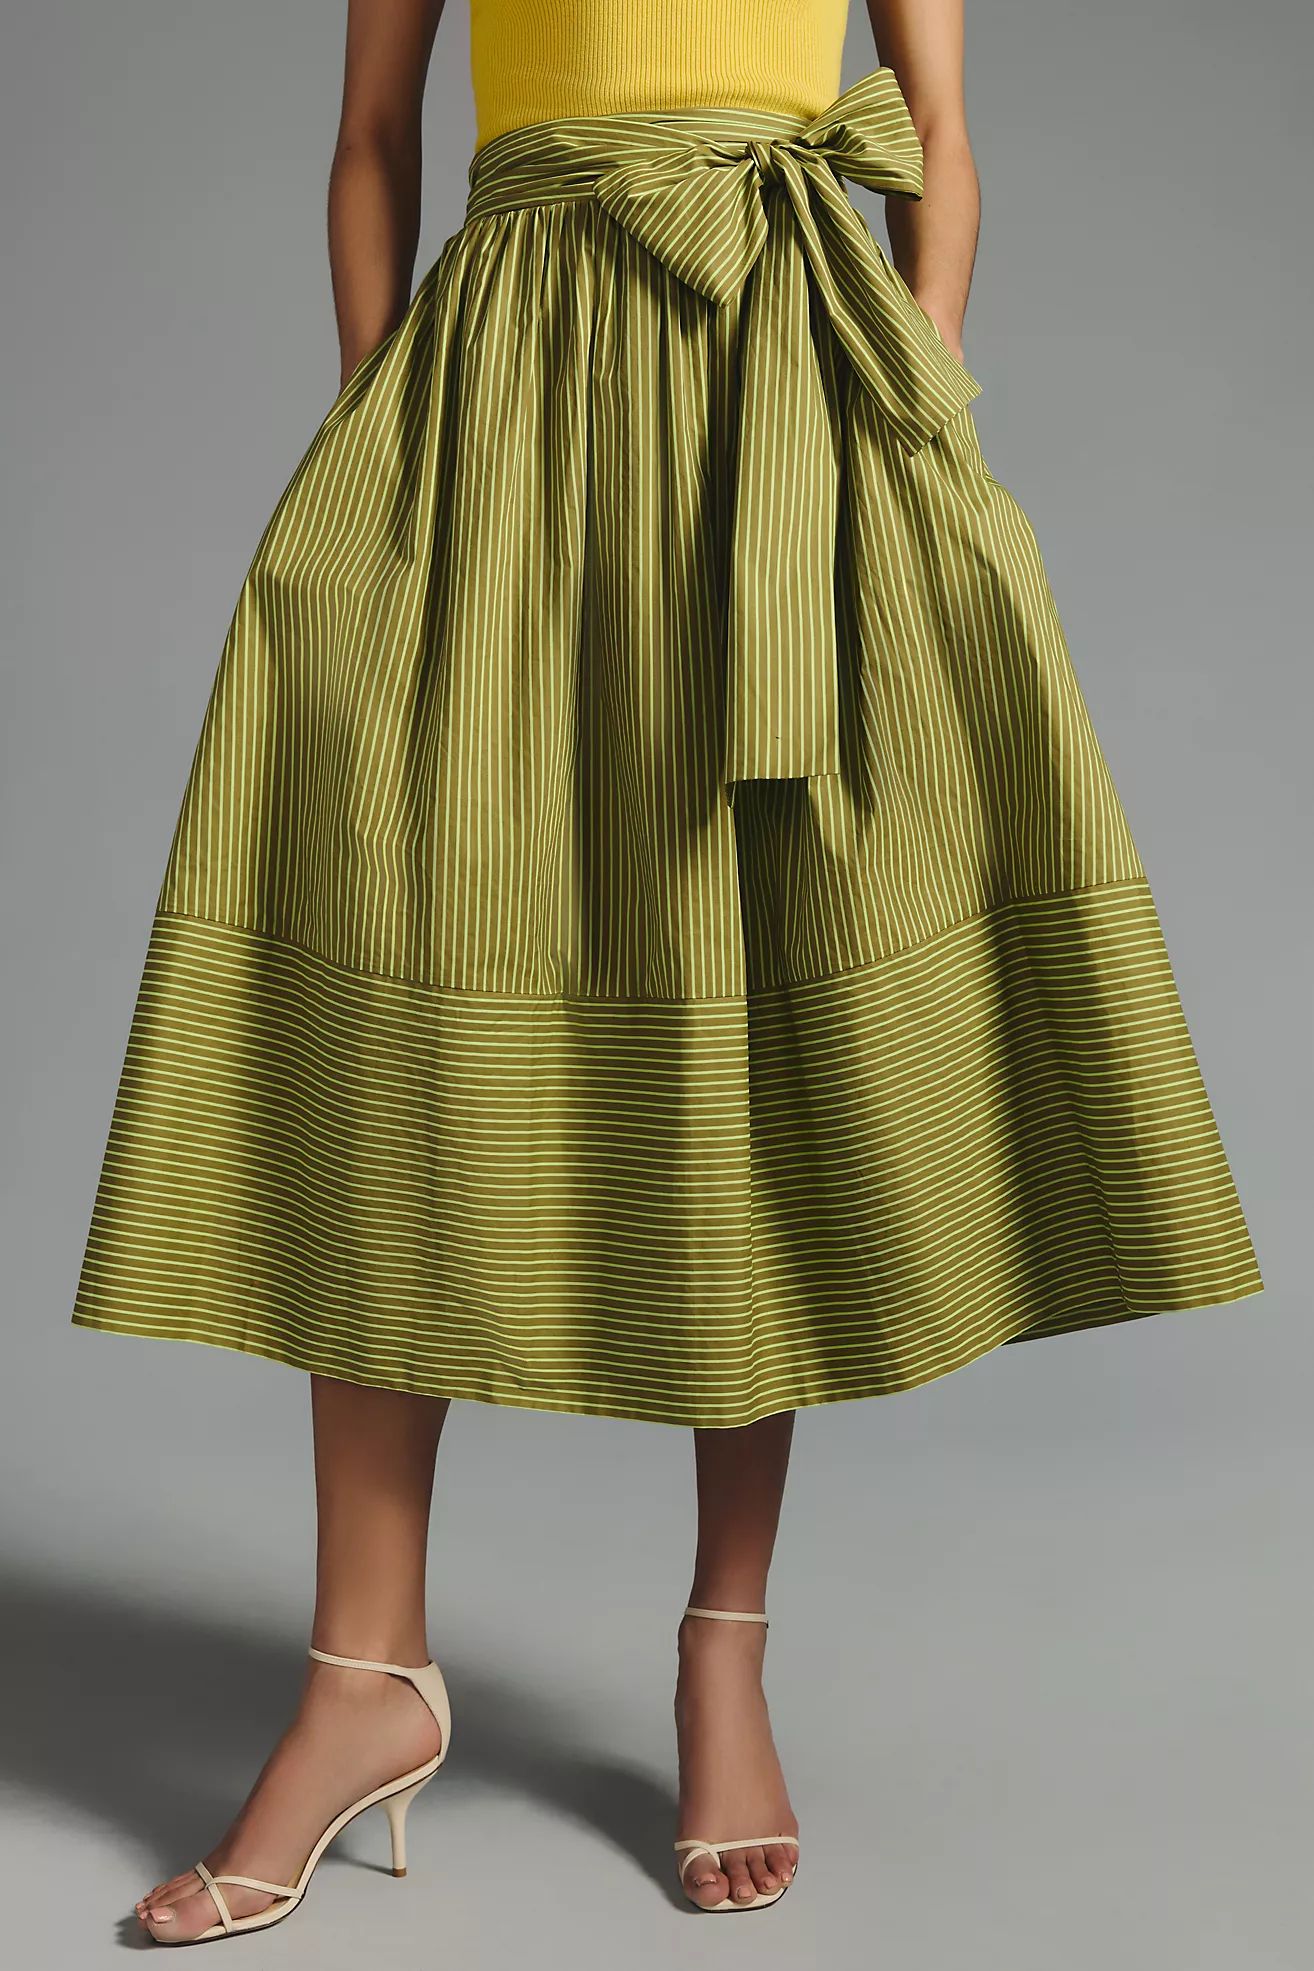 Sunday in Brooklyn Striped A-Line Skirt | Anthropologie (US)